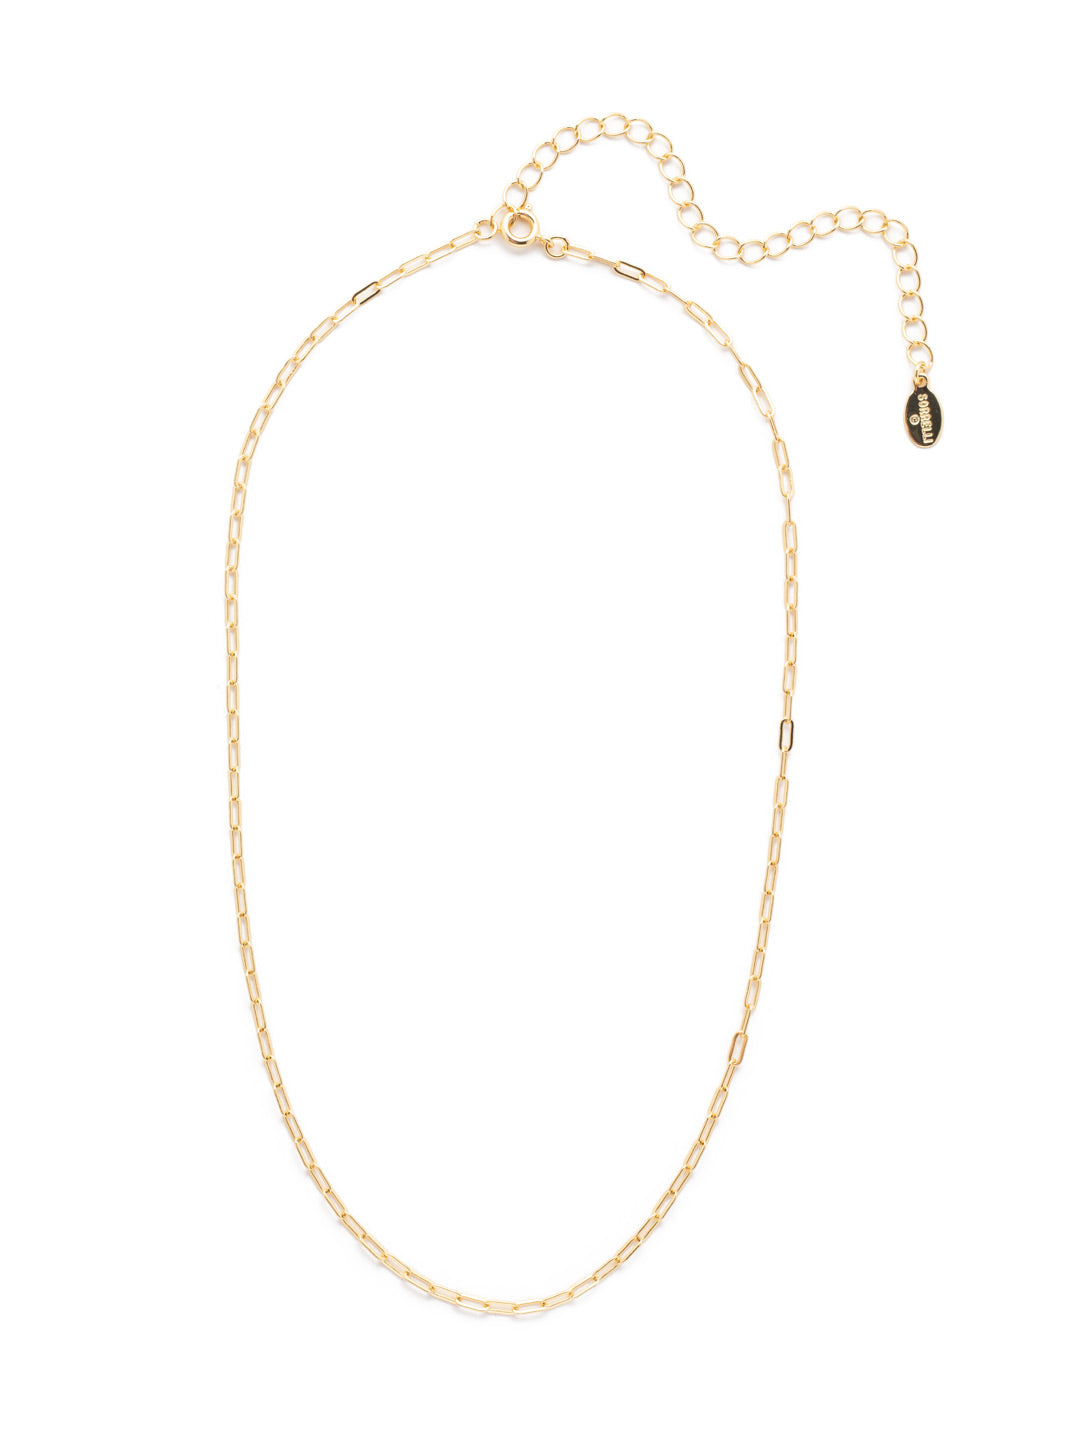 Minnie Chain Tennis Necklace - NEV109BGCRY - <p>The Minnie Chain Tennis Necklace is the Jacinda Tennis Necklace's little sister! A tiny take on the popular paperclip chain style makes this necklace a wardrobe staple that can be enjoyed for decades. From Sorrelli's Crystal collection in our Bright Gold-tone finish.</p>